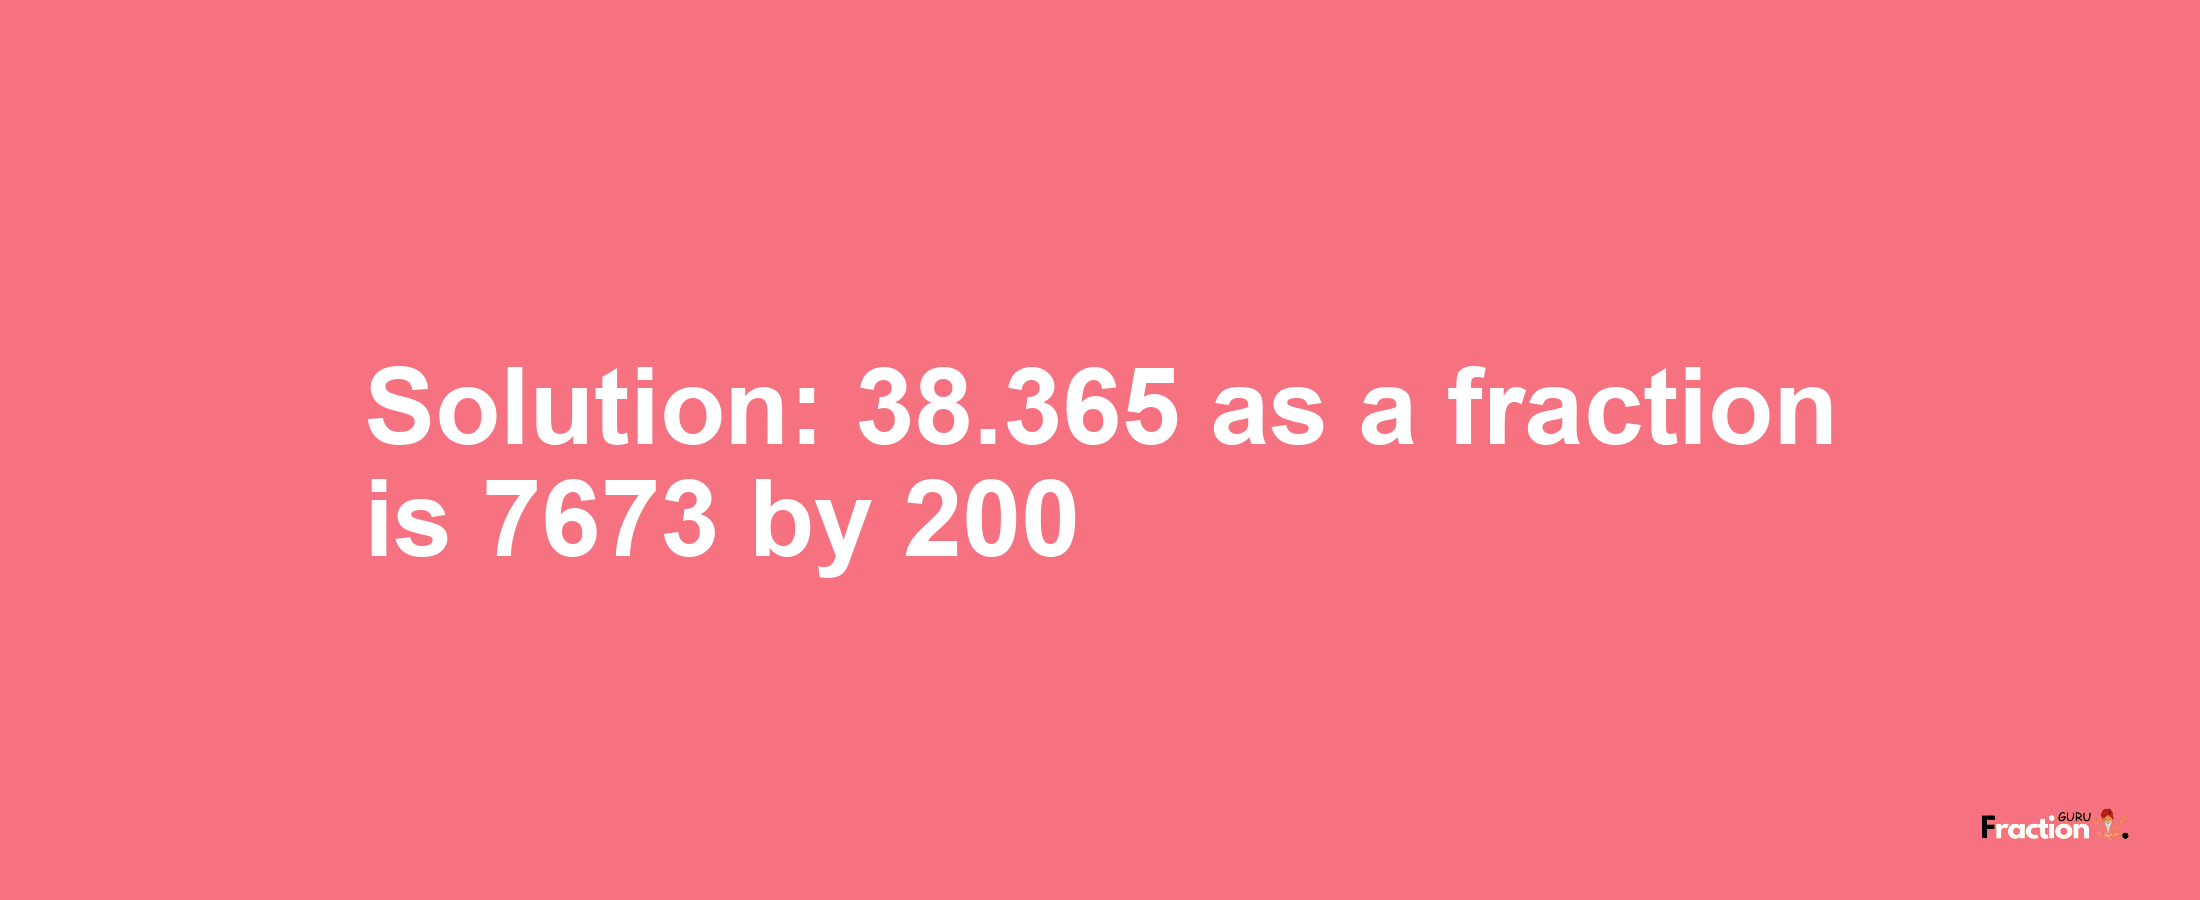 Solution:38.365 as a fraction is 7673/200